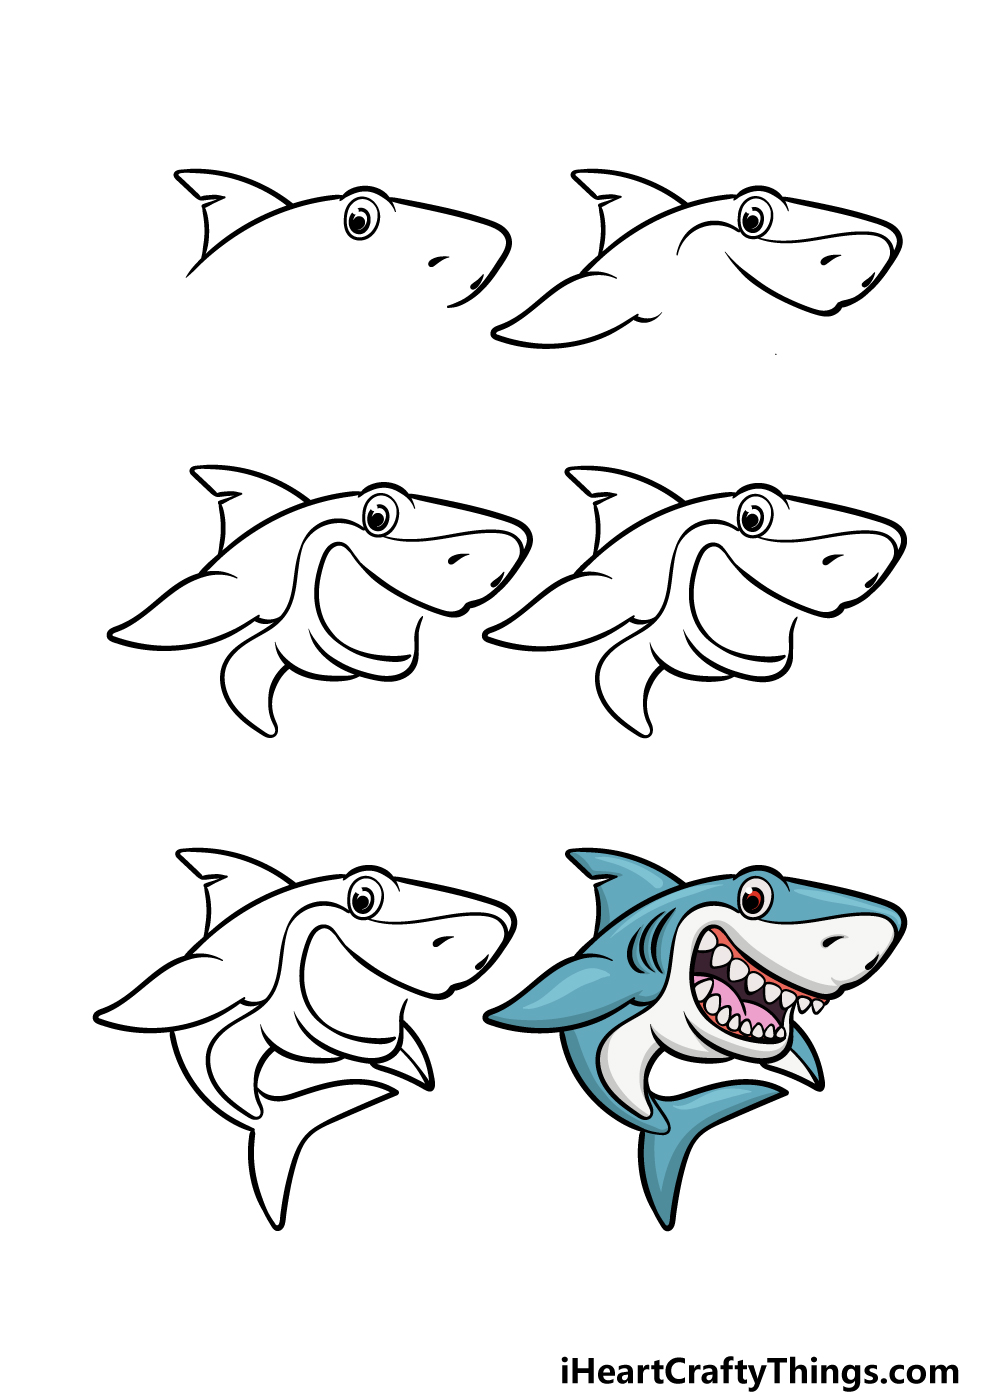 how to draw a cartoon shark in 6 steps